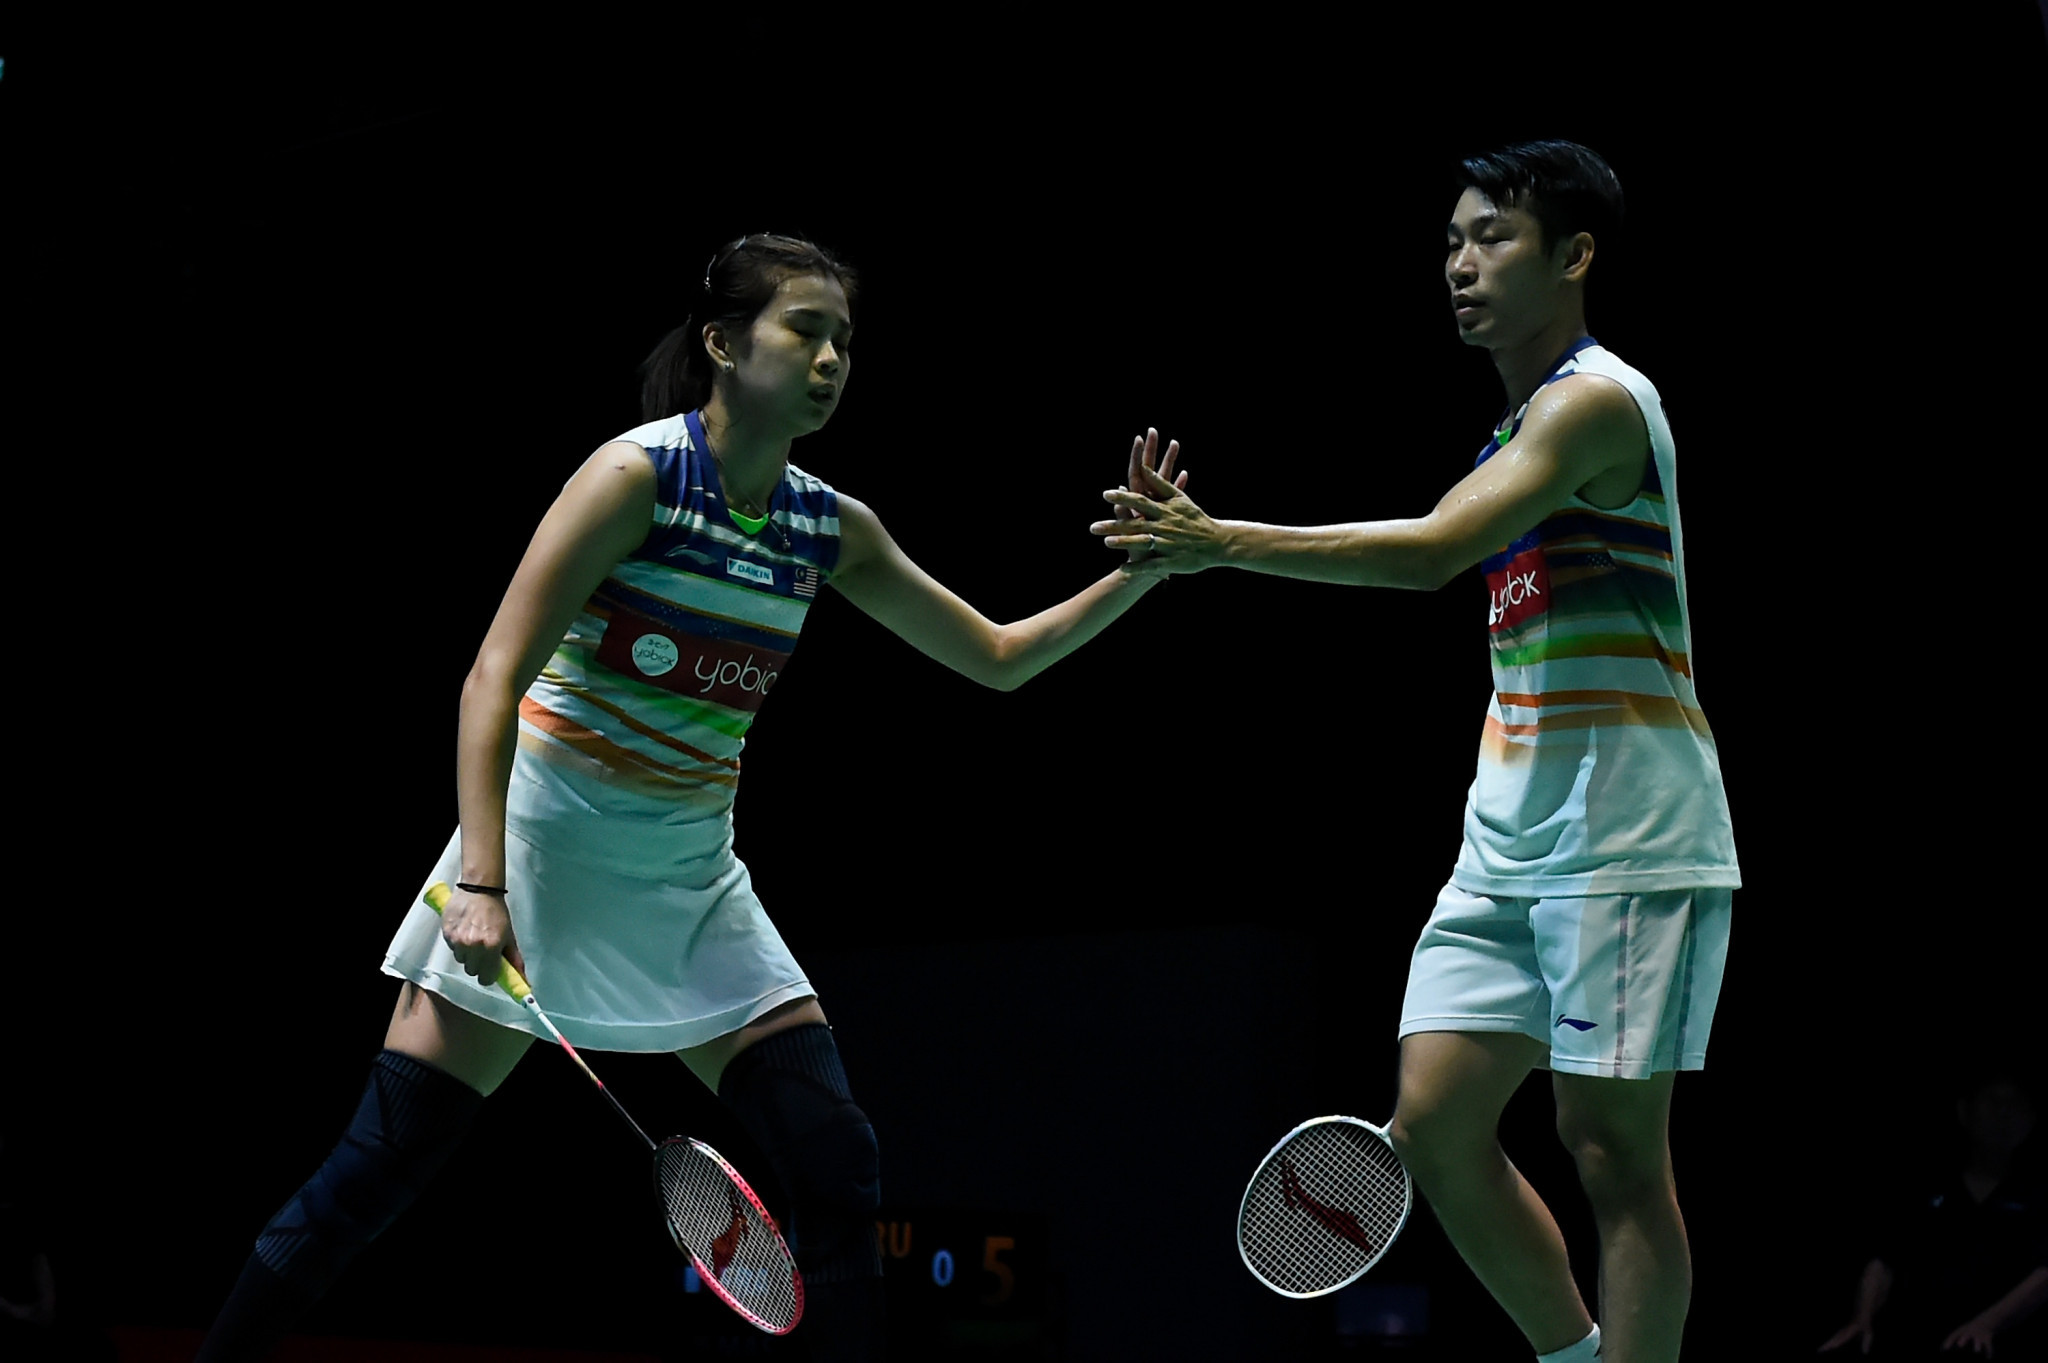 Top seeds Chan Peng Soon and Goh Liu Ying of Malaysia battled to a three-game win in the first round of the mixed doubles at the BWF Swiss Open ©Getty Images